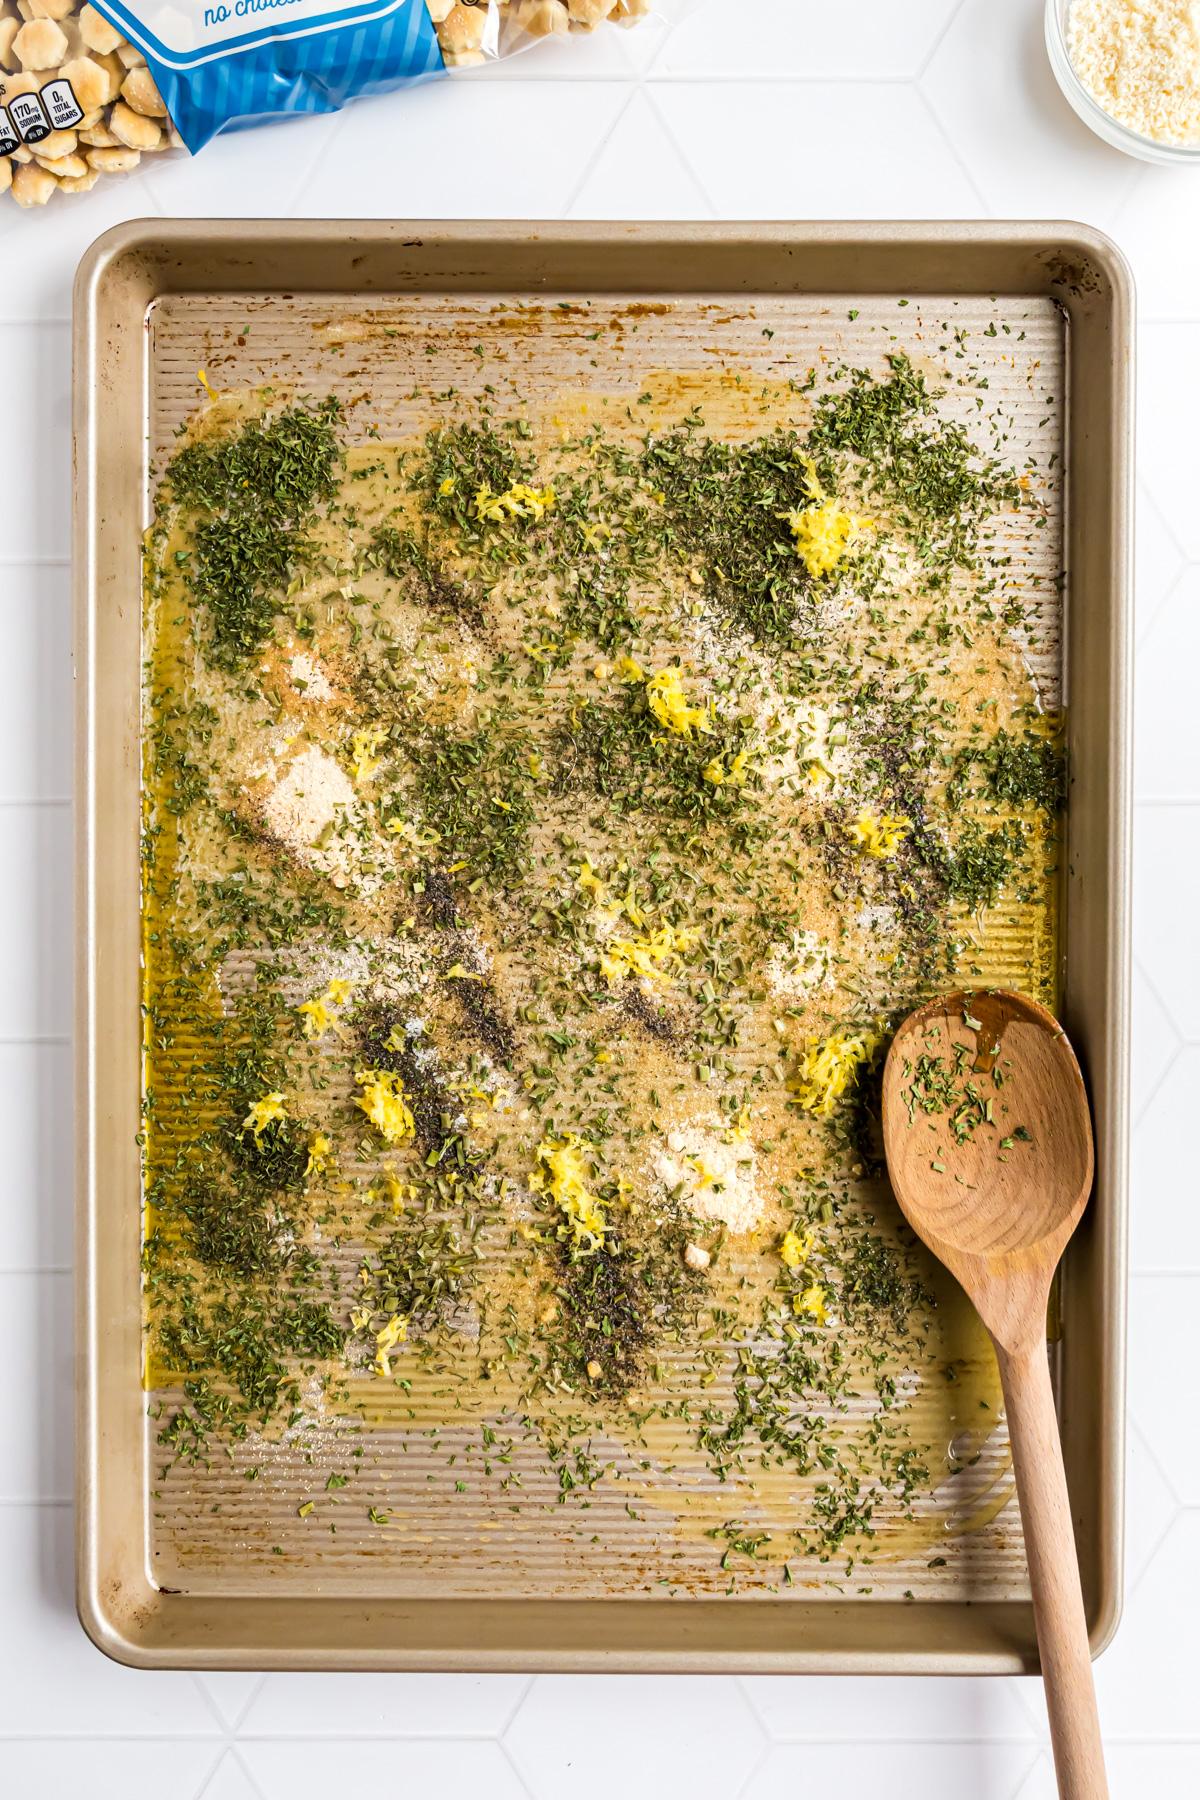 The next step in making the soup crackers includes combining the spices on the sheet pan.